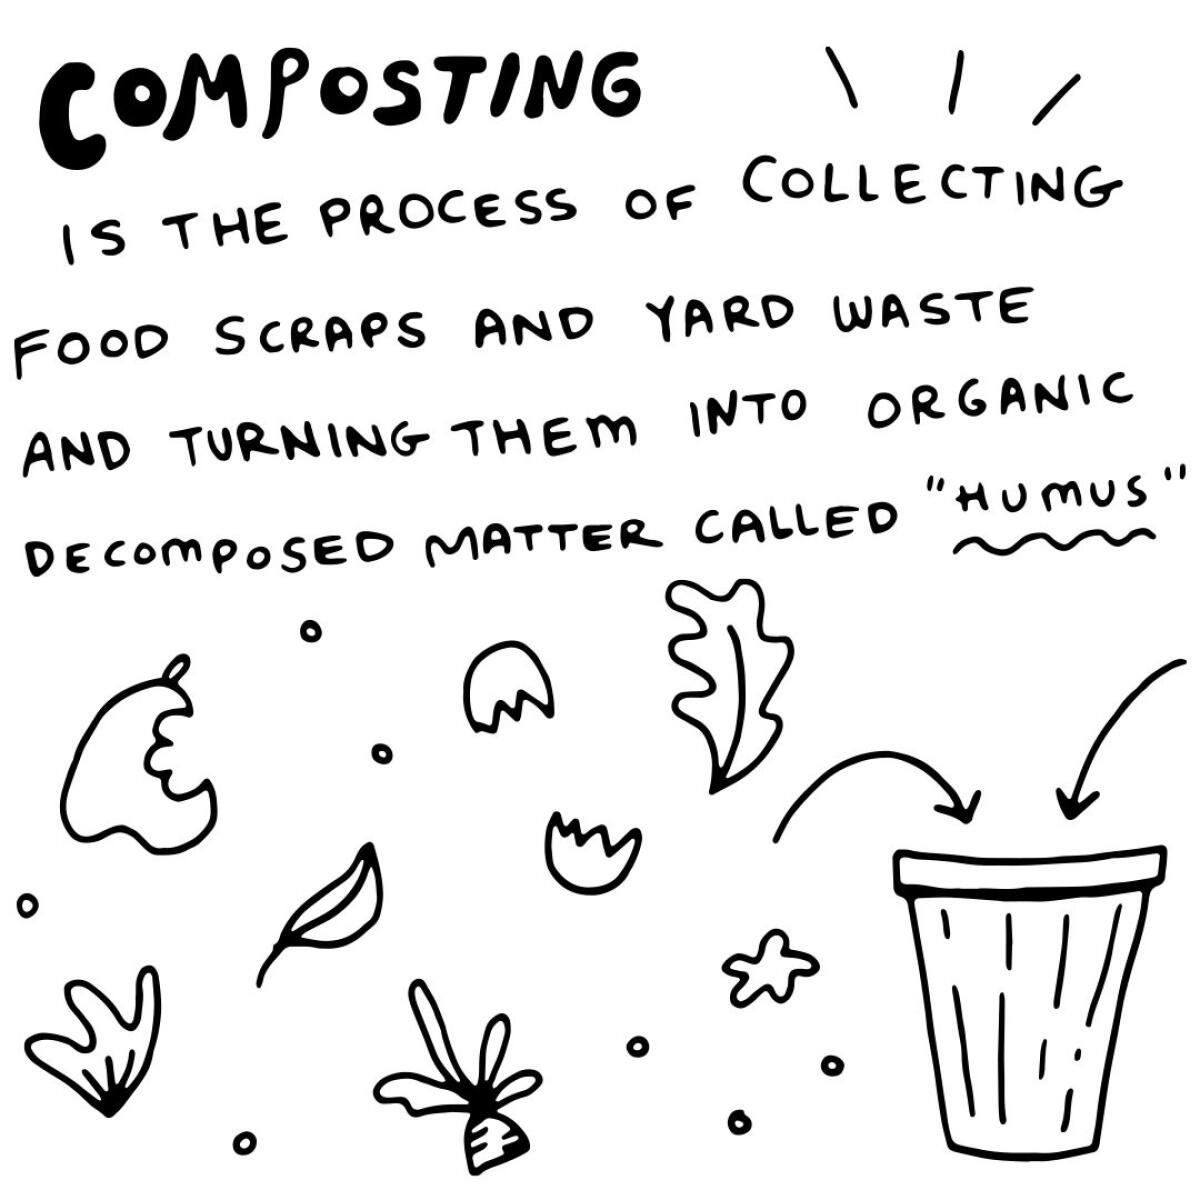 "composting is the process of collecting food scraps and yard waste and turning them into organic decomposed matter"